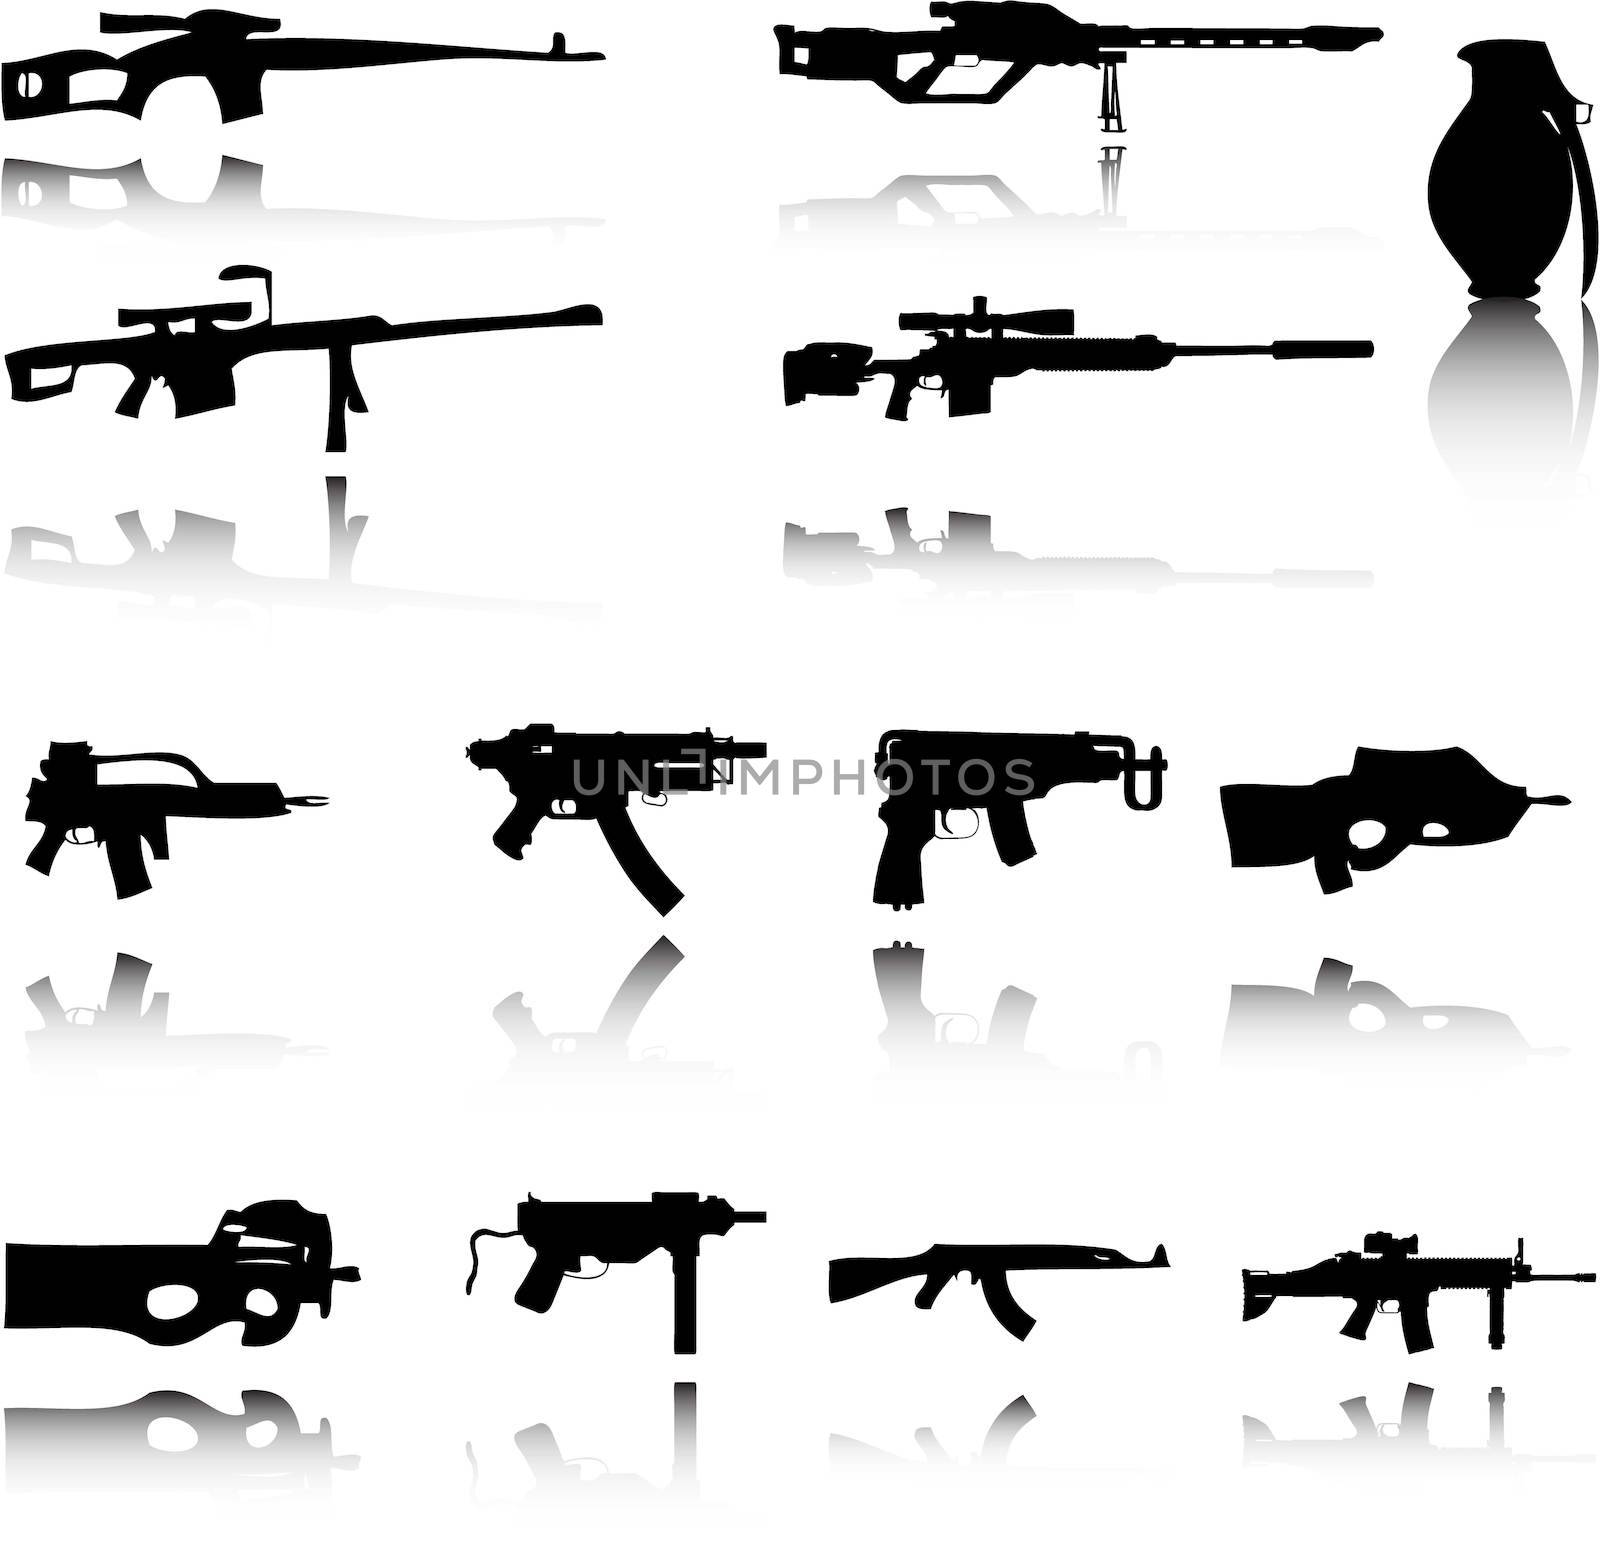 An Illustration of Set of Weapons by DragonEyeMedia